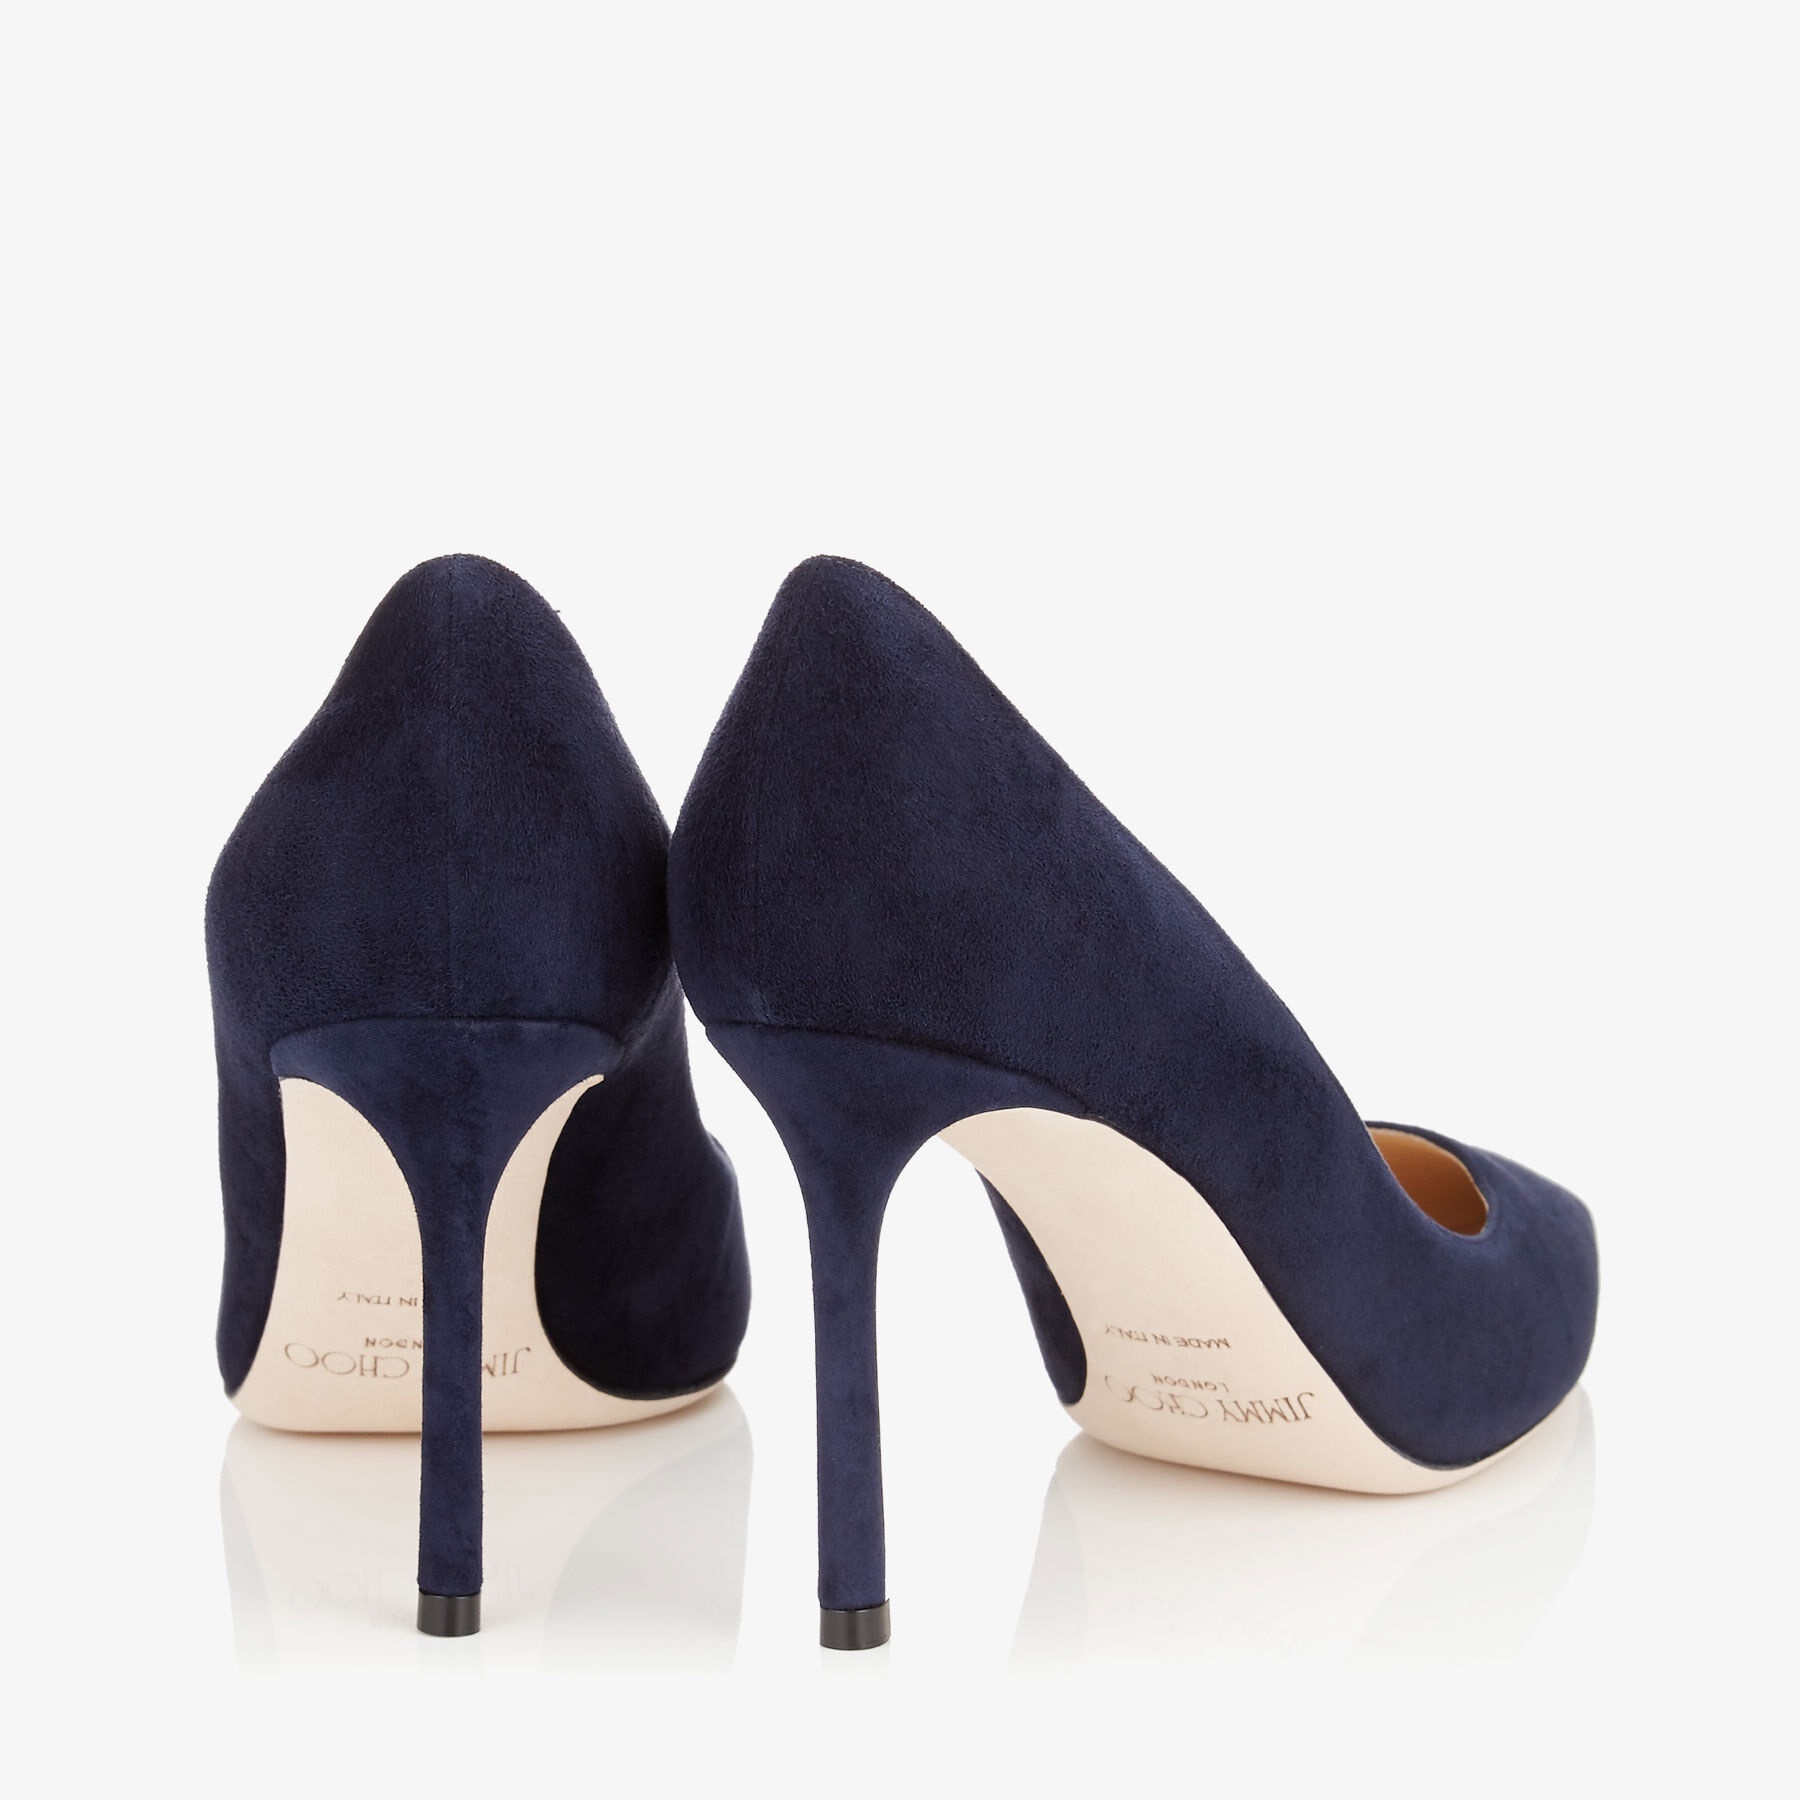 Romy 85
Navy Suede Pointy Toe Pumps - 5